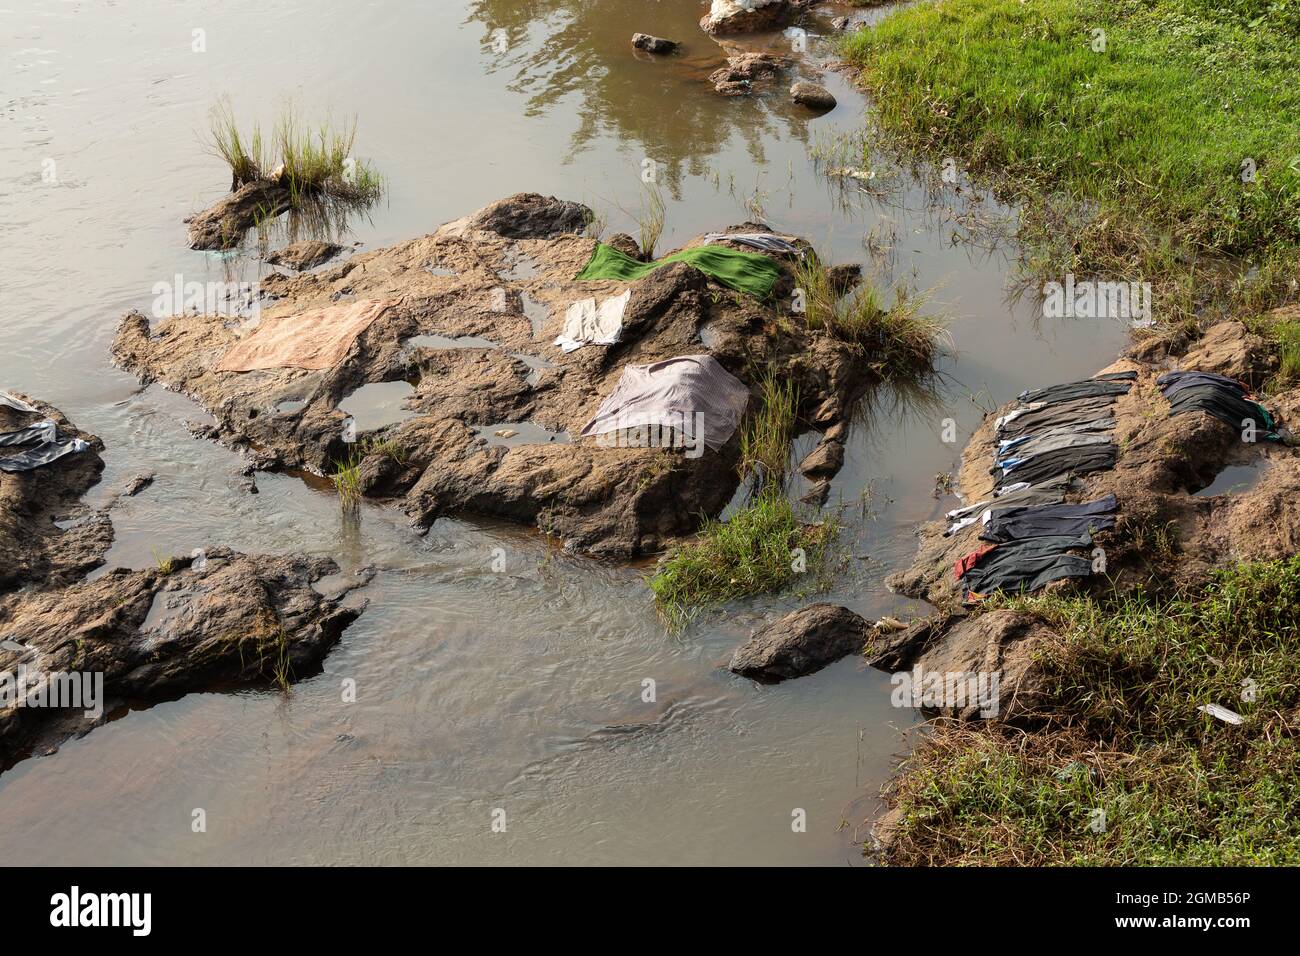 In India, laundry lies on a rock in a river to dry. Stock Photo